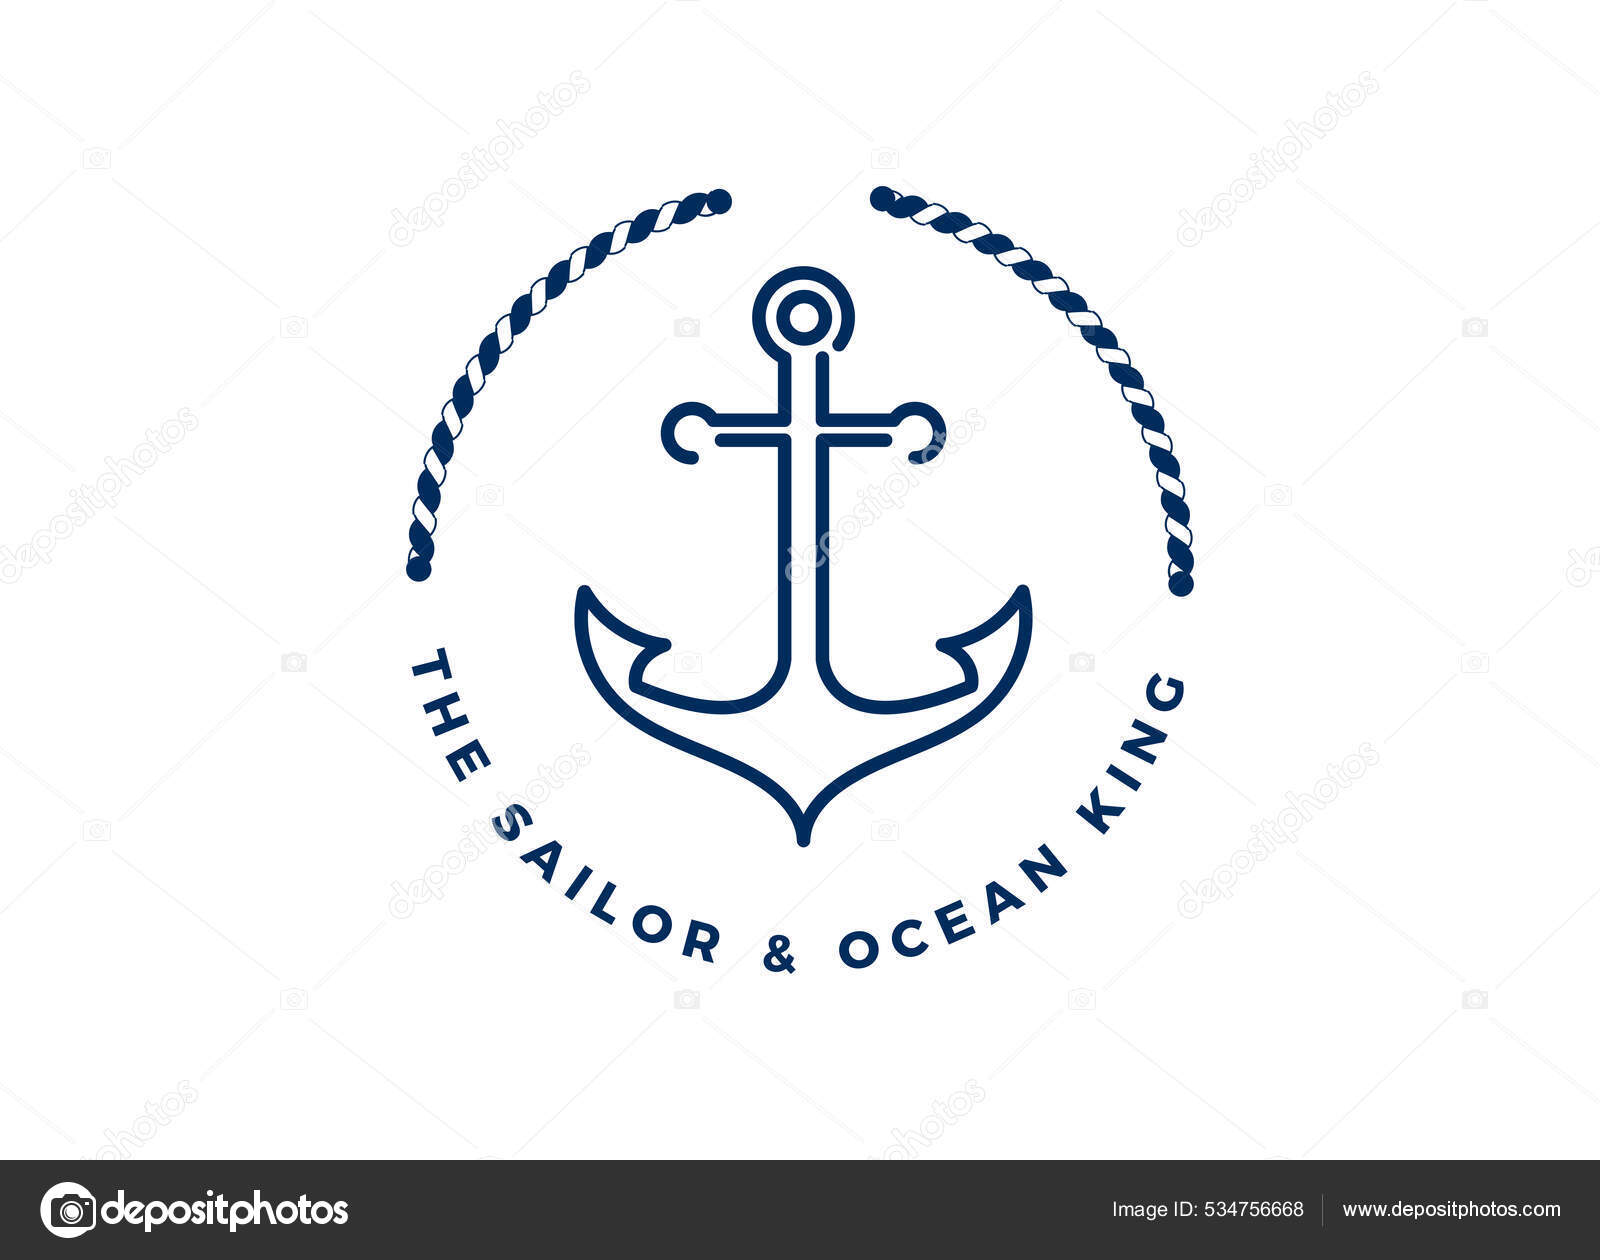 Anchor Rope Crown Marine Ship Boat Logo Design Stock Vector by